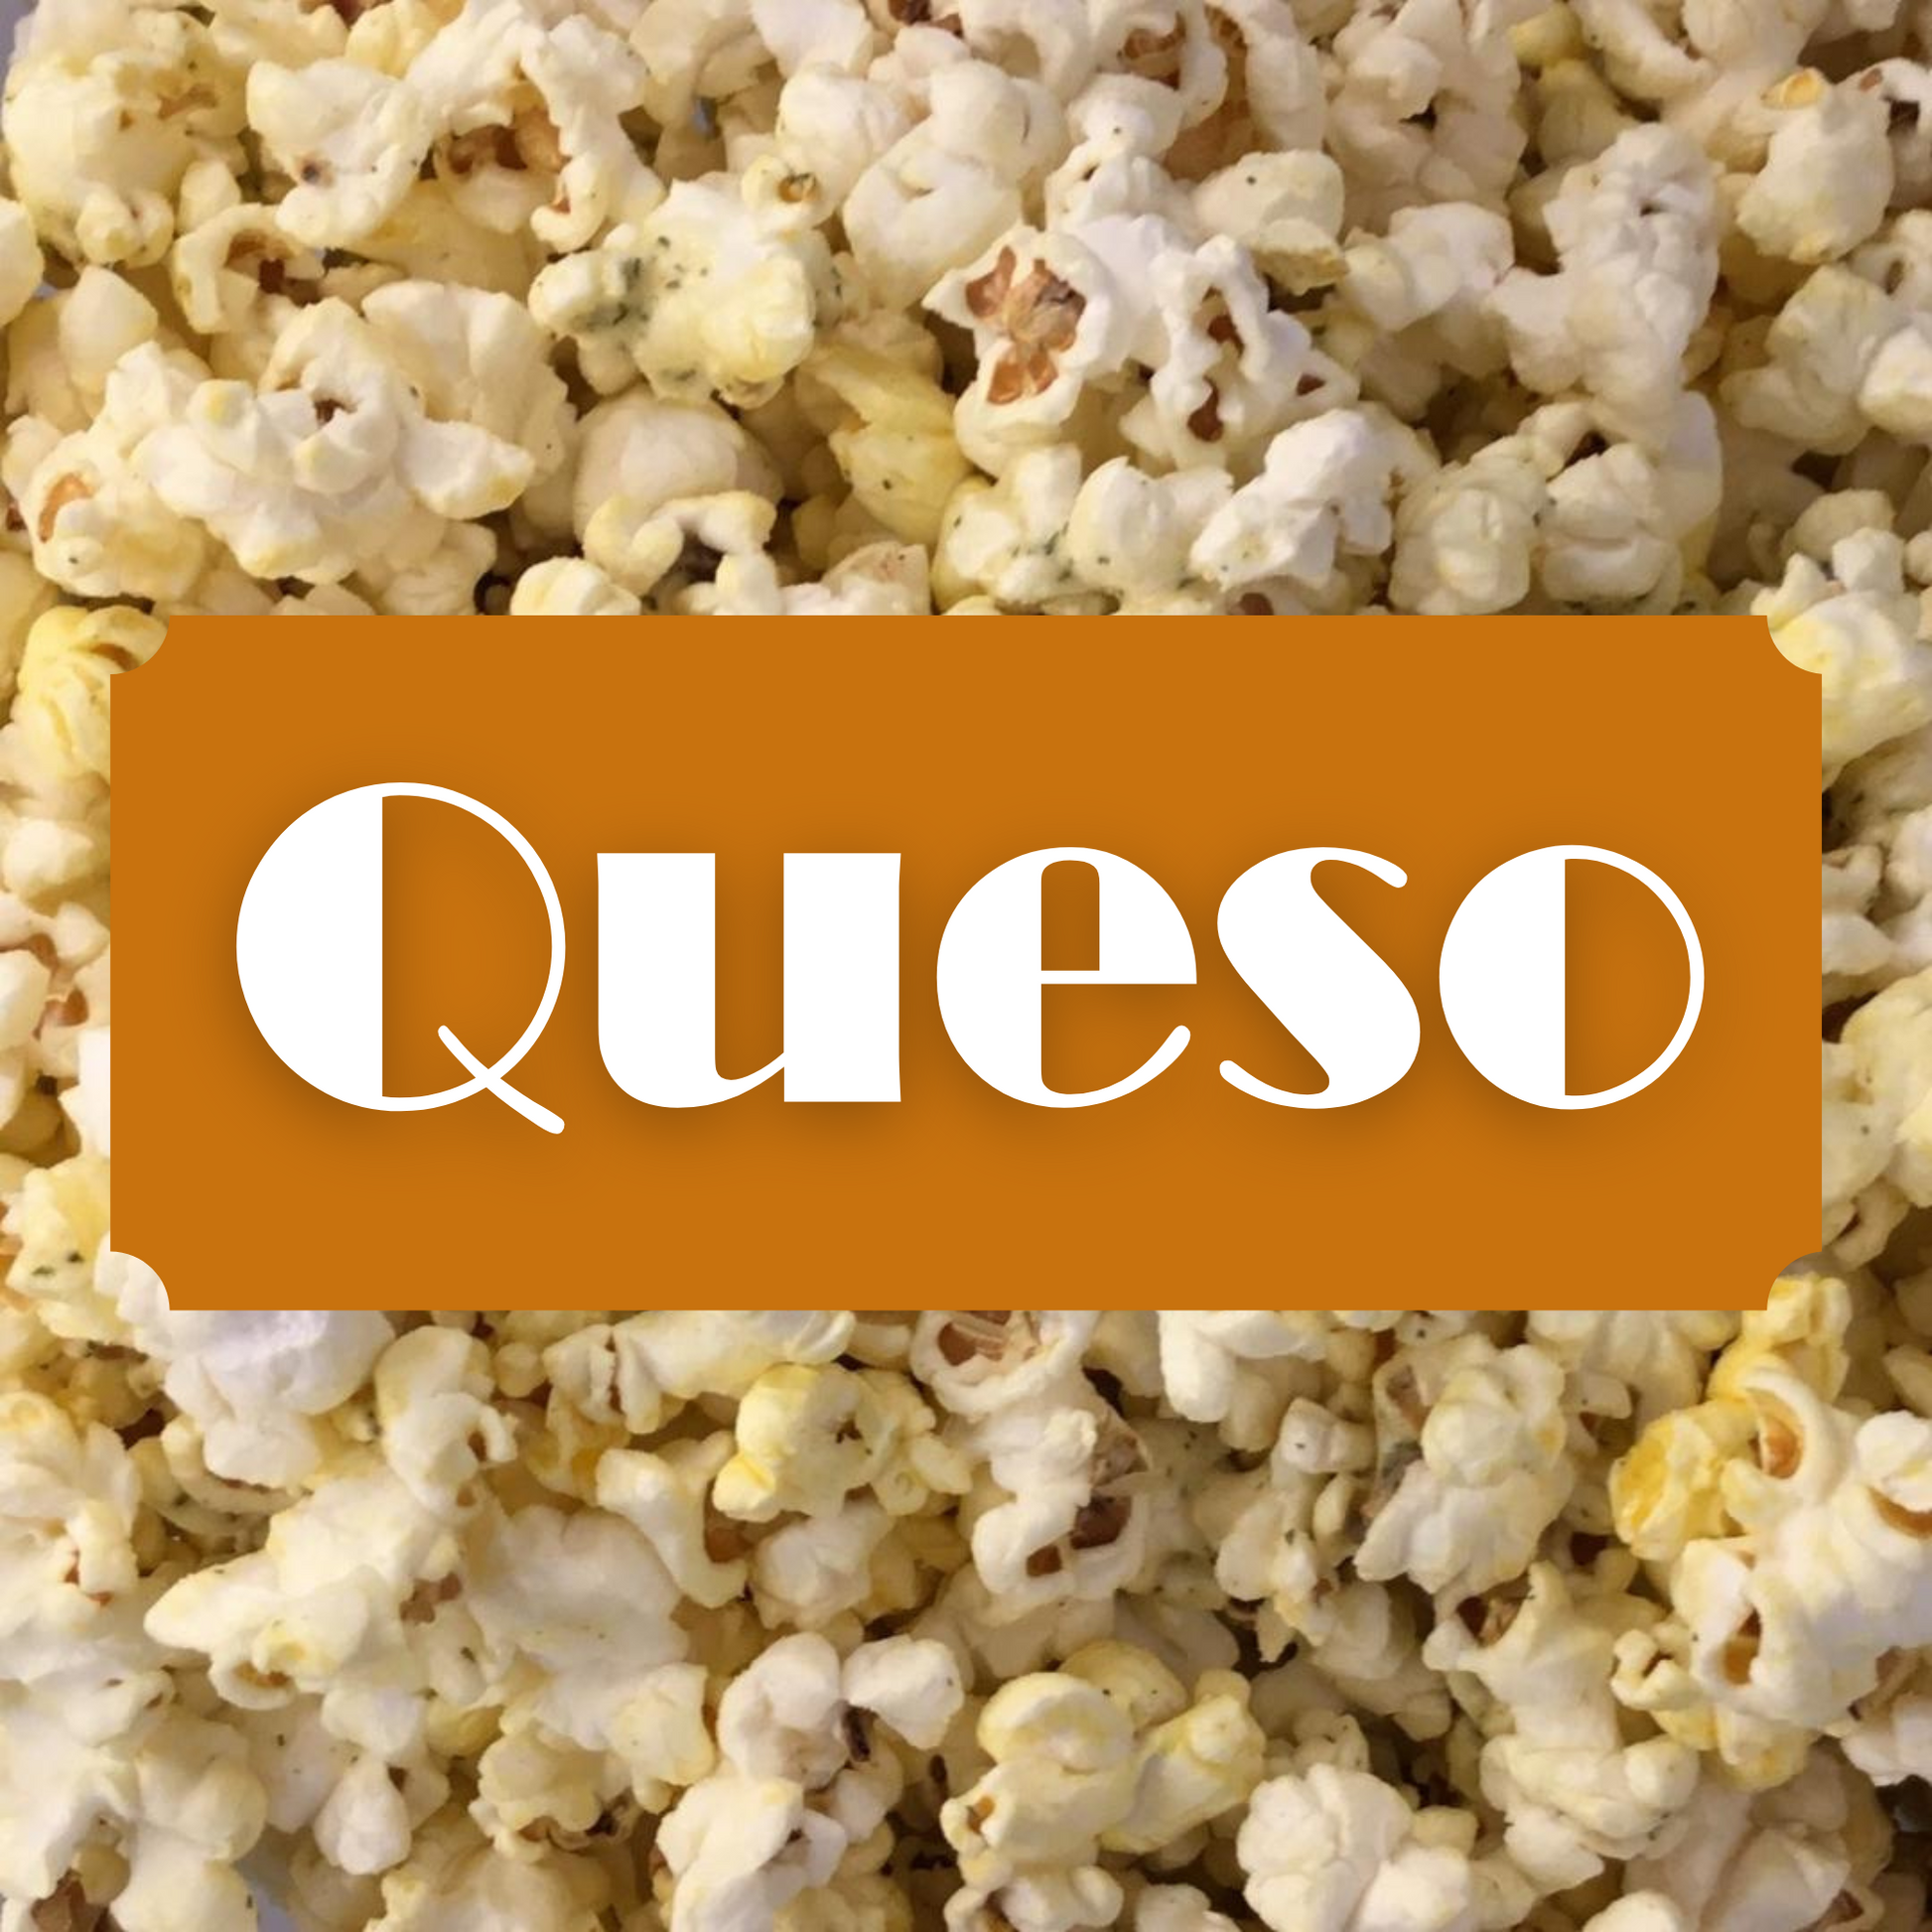 Small Batch Gourmet Jalapeno White Cheddar, Jalapeno, White Cheddar, Snack,Jalapeno White Cheddar Popcorn, Seasoned Popcorn, Jalapeno White Cheddar Flavored, Popcorn, Jalapeno Popcorn, White CheddarPopcorn